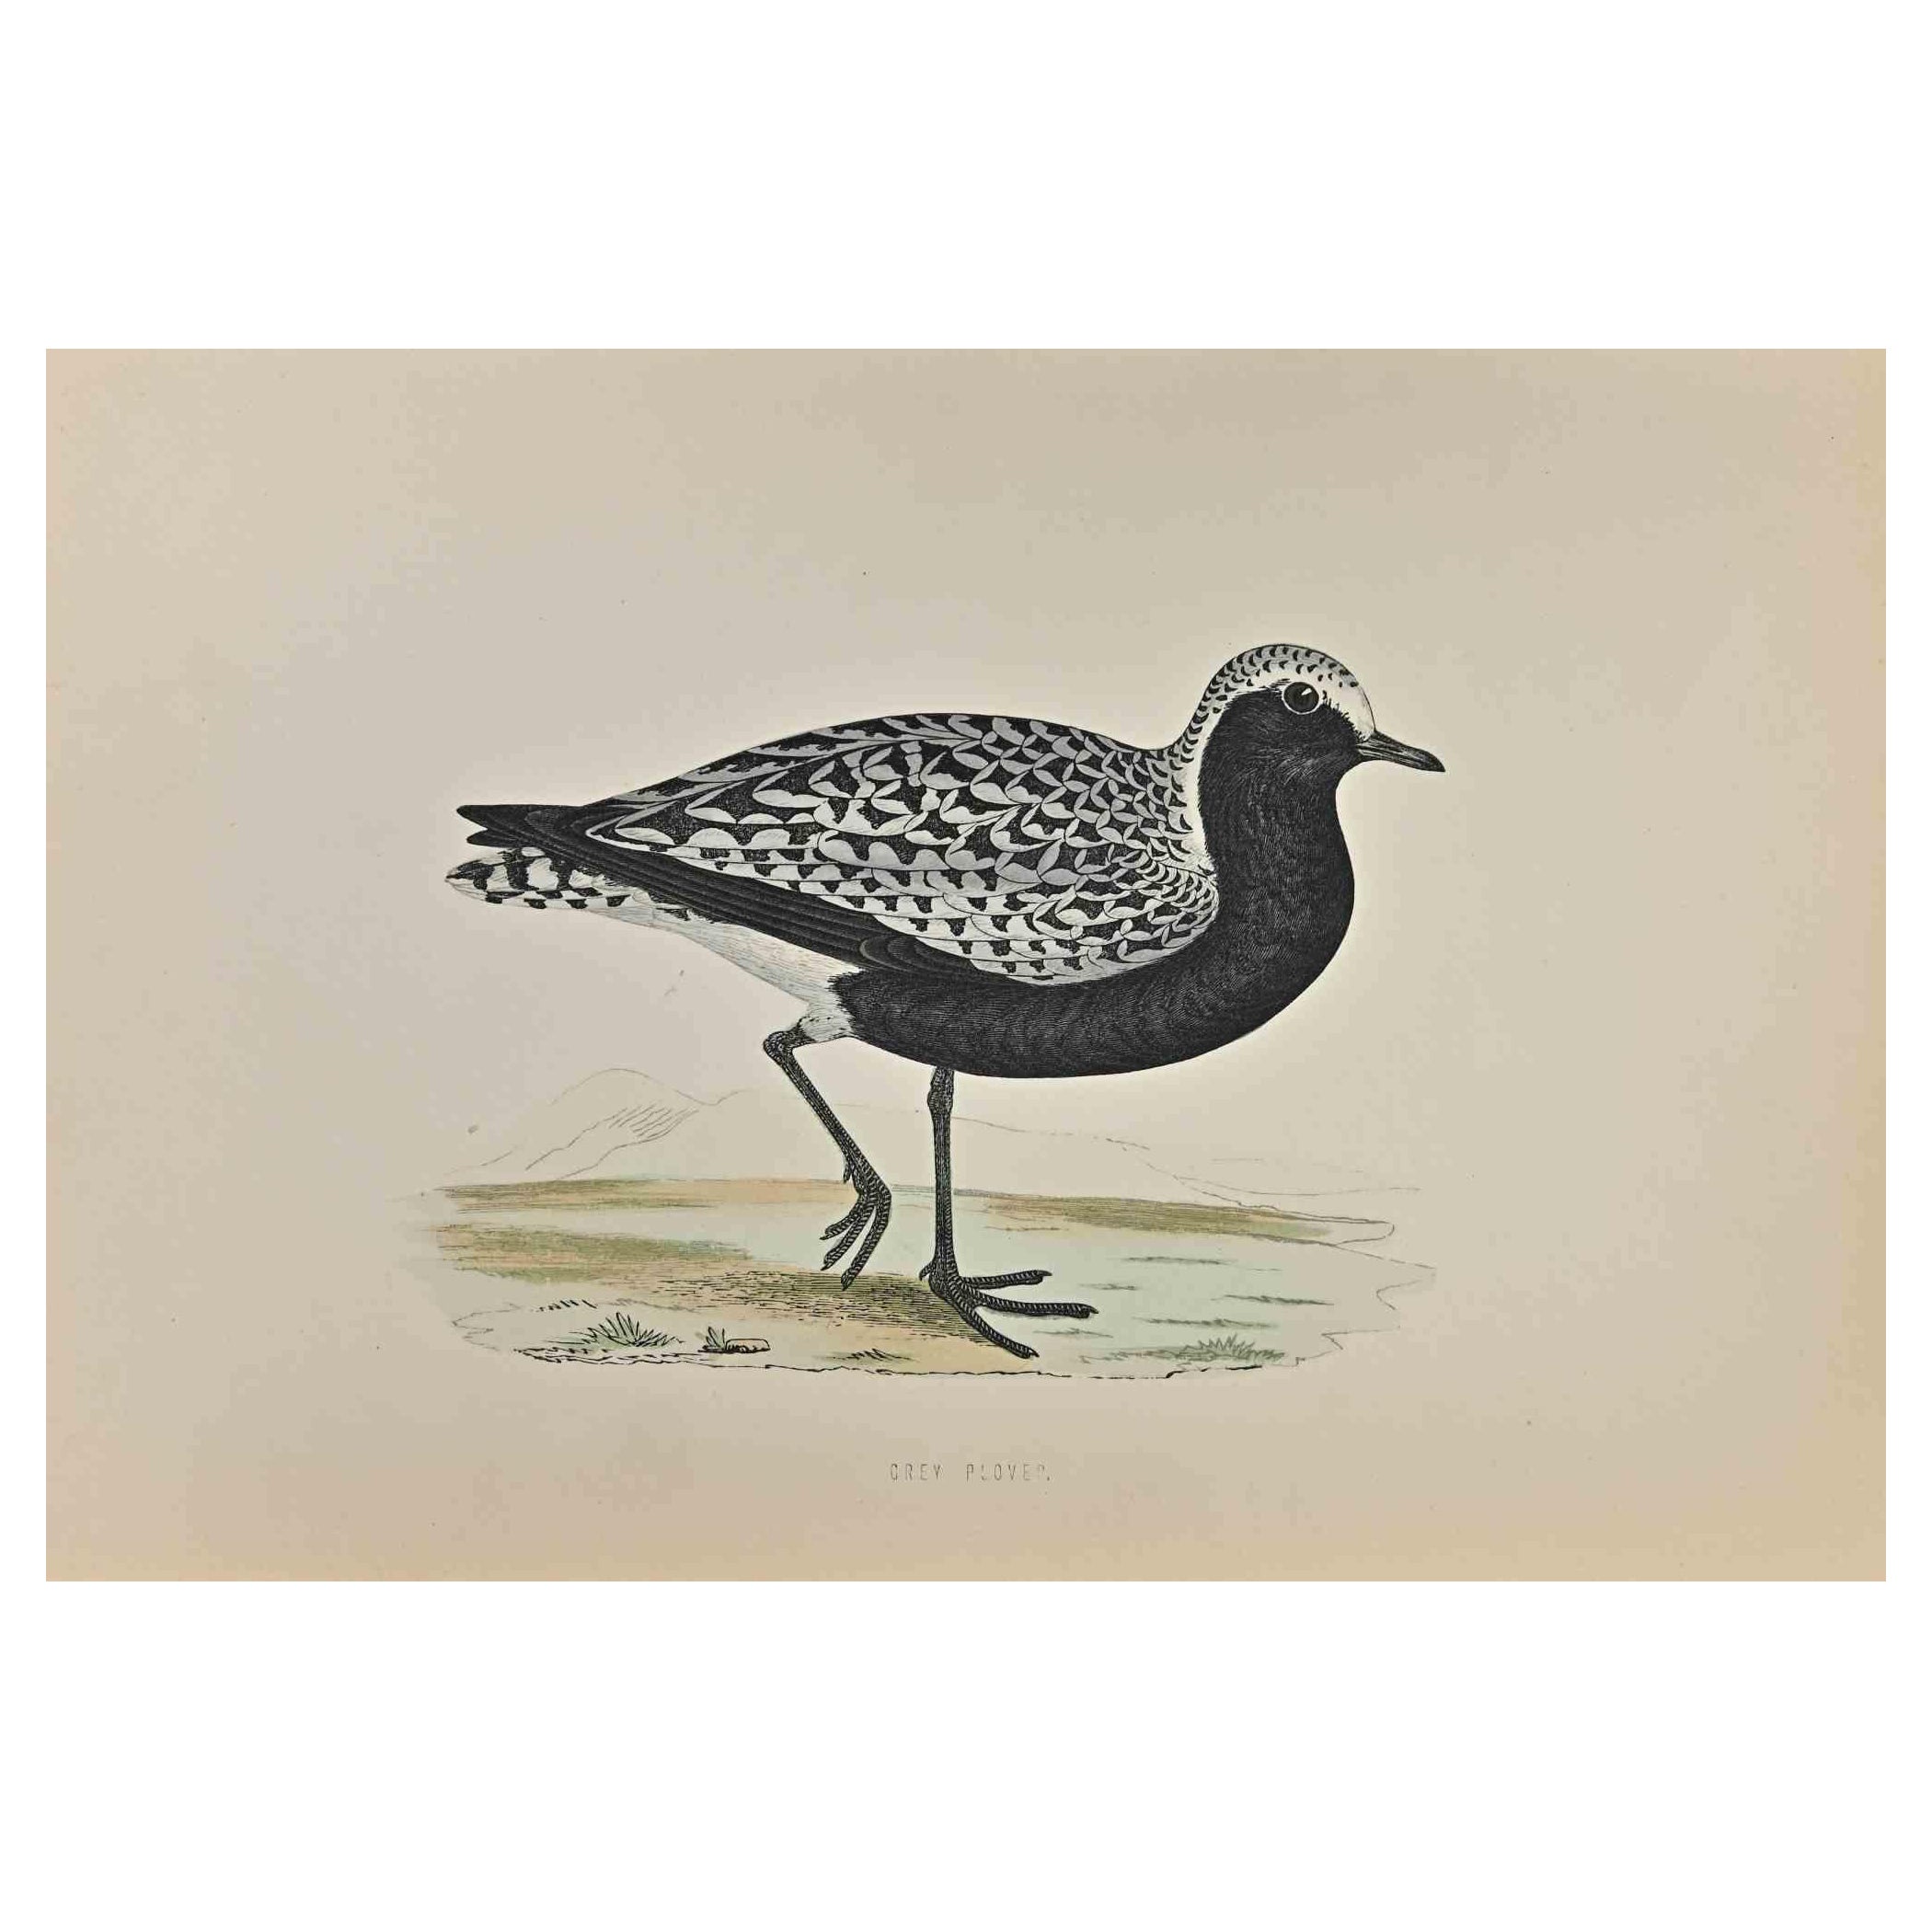 Grey Plover is a modern artwork realized in 1870 by the British artist Alexander Francis Lydon (1836-1917) . 

Woodcut print, hand colored, published by London, Bell & Sons, 1870.  Name of the bird printed in plate. This work is part of a print